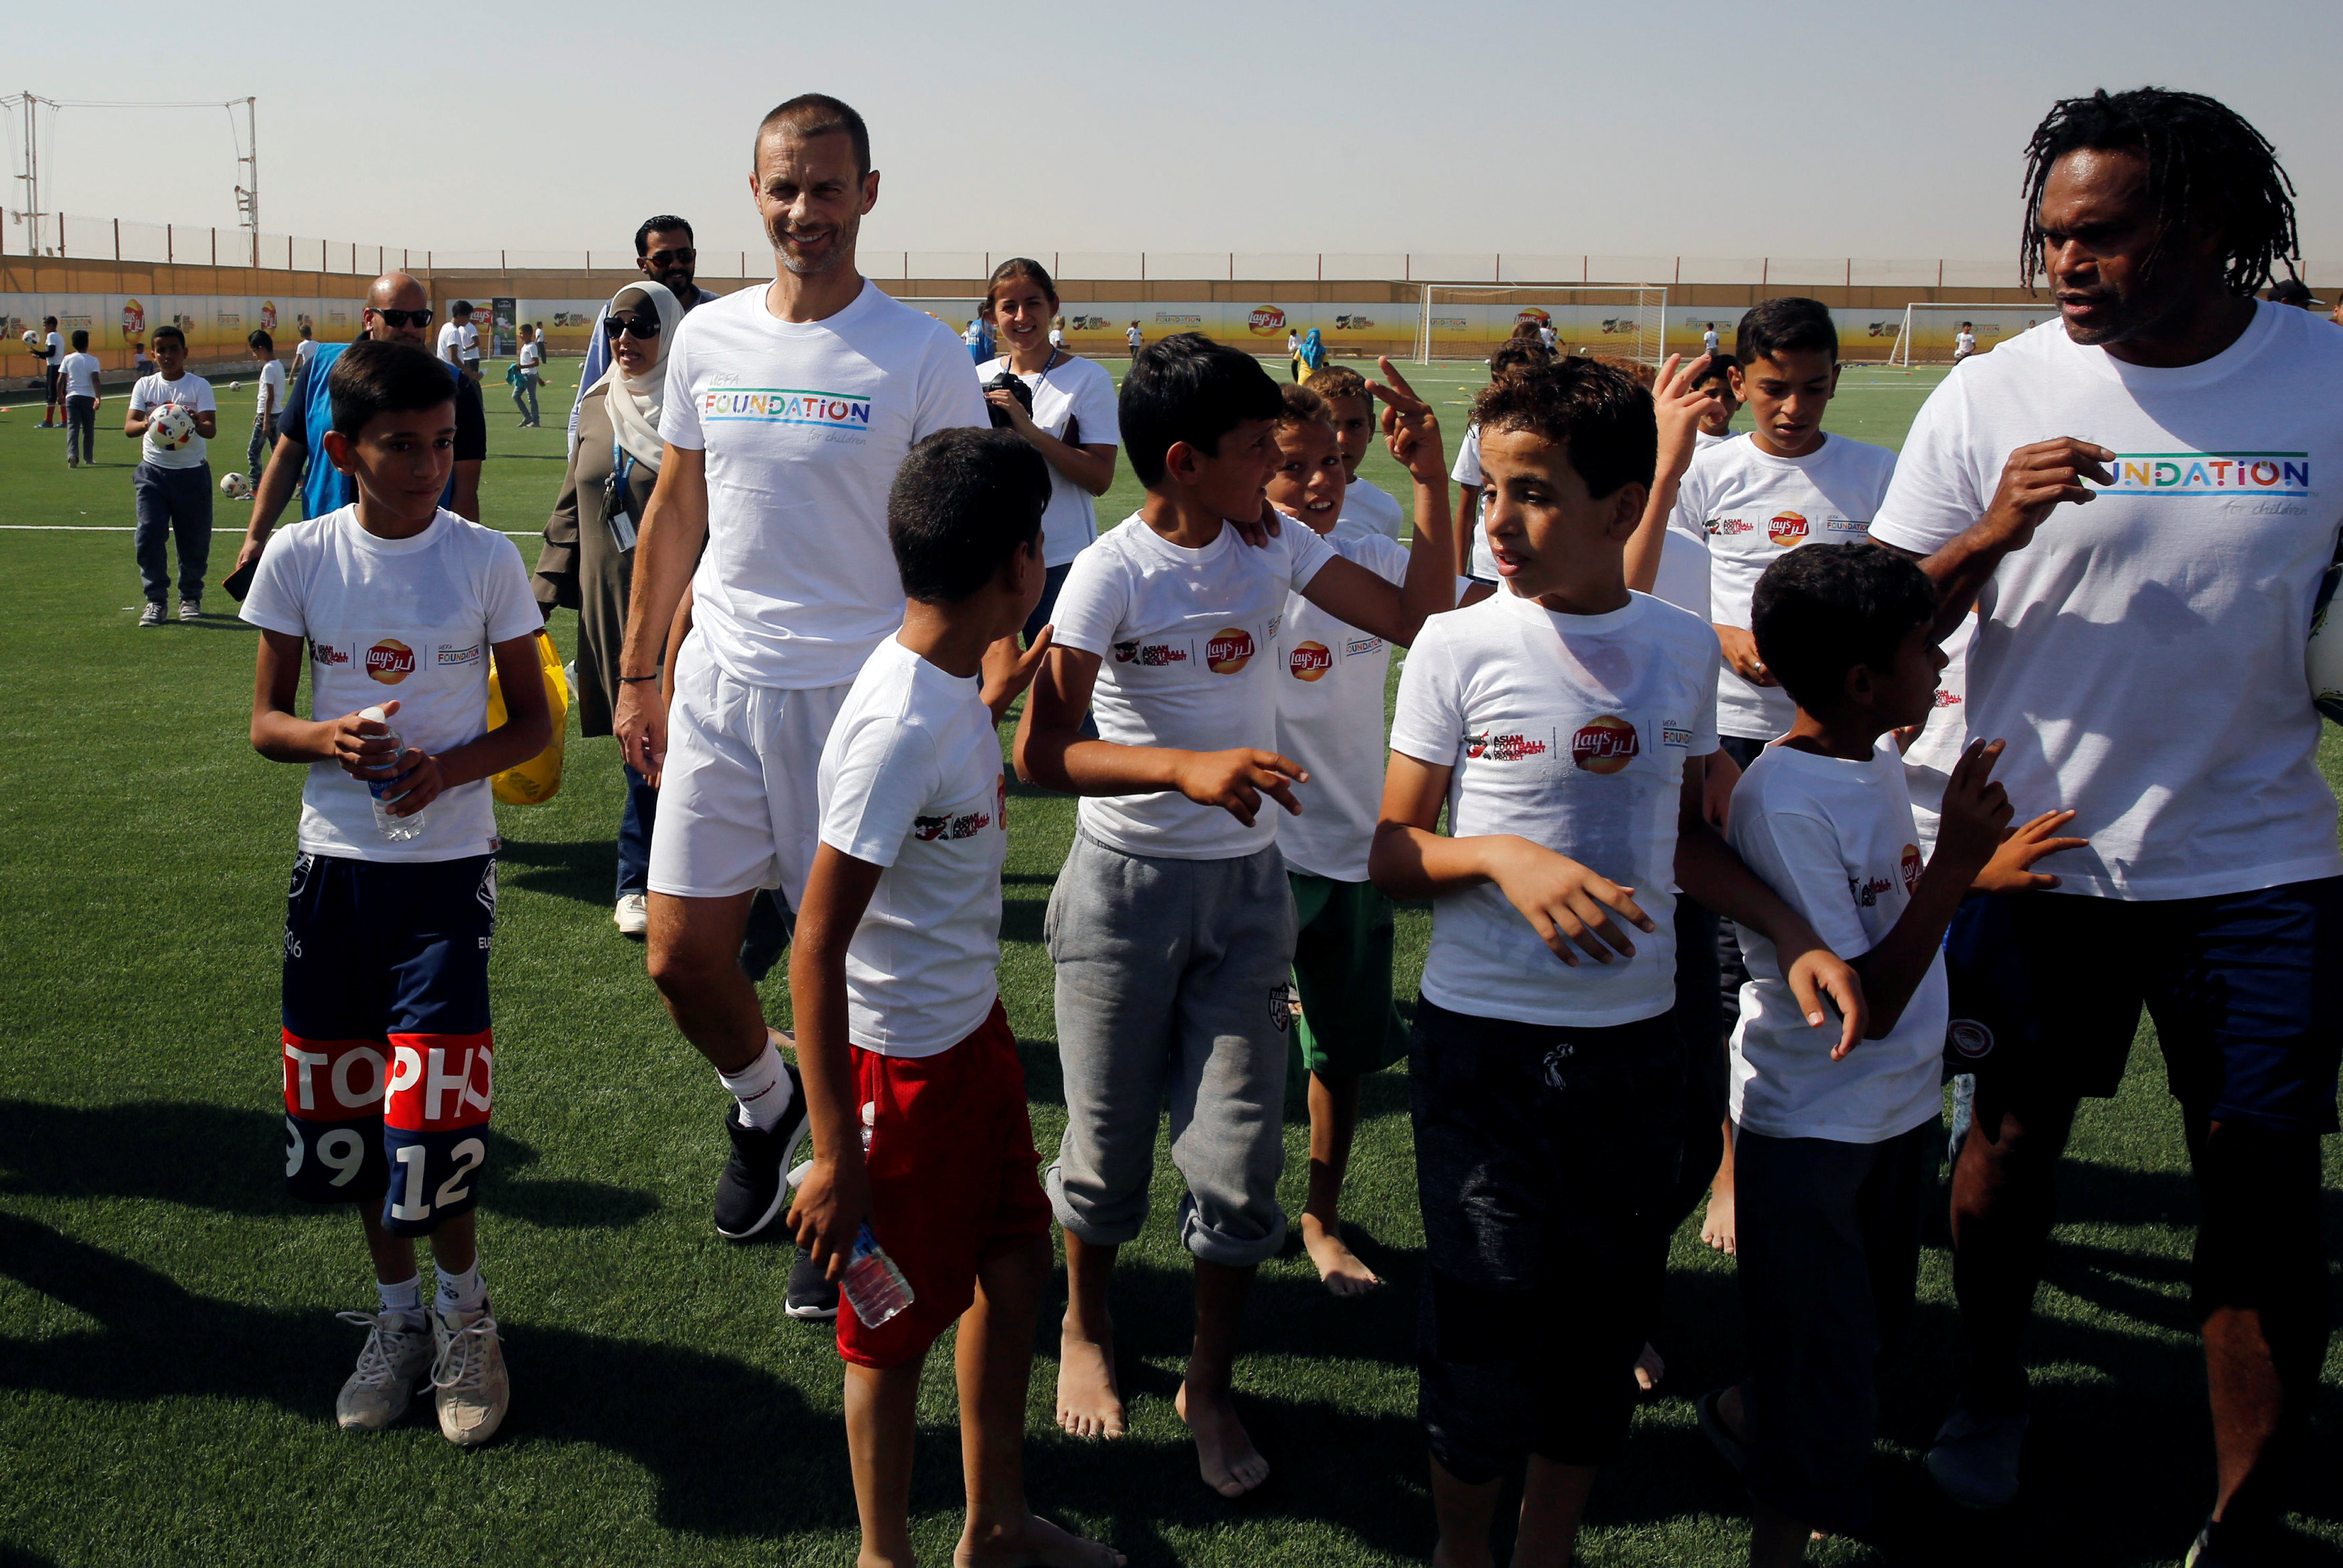 In pictures: Inauguration of new football pitch at the Al Zaatari refugee camp in Jordan